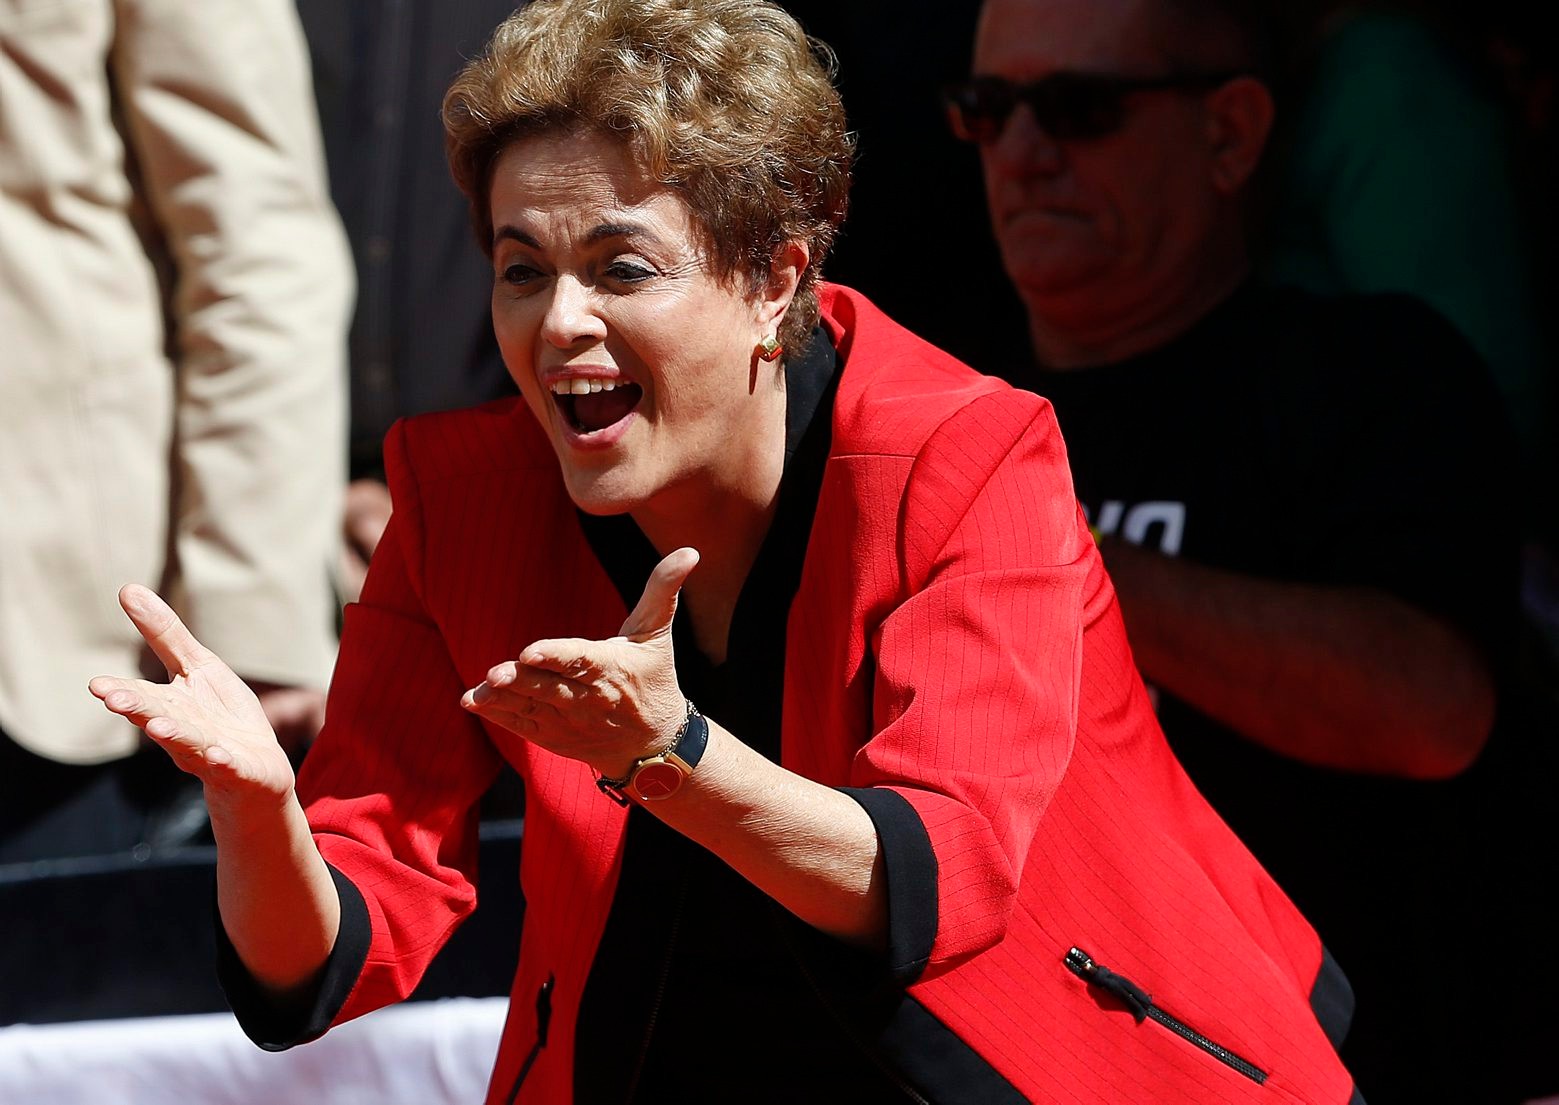 Brazil's President Dilma Rousseff blows kisses towards supporters during the May Day rally in Sao Paulo, Brazil, Sunday, May 1, 2016. President Rousseff is facing impeachment over allegations her administration violated fiscal laws. (AP Photo/Andre Penner) Brazil May Day